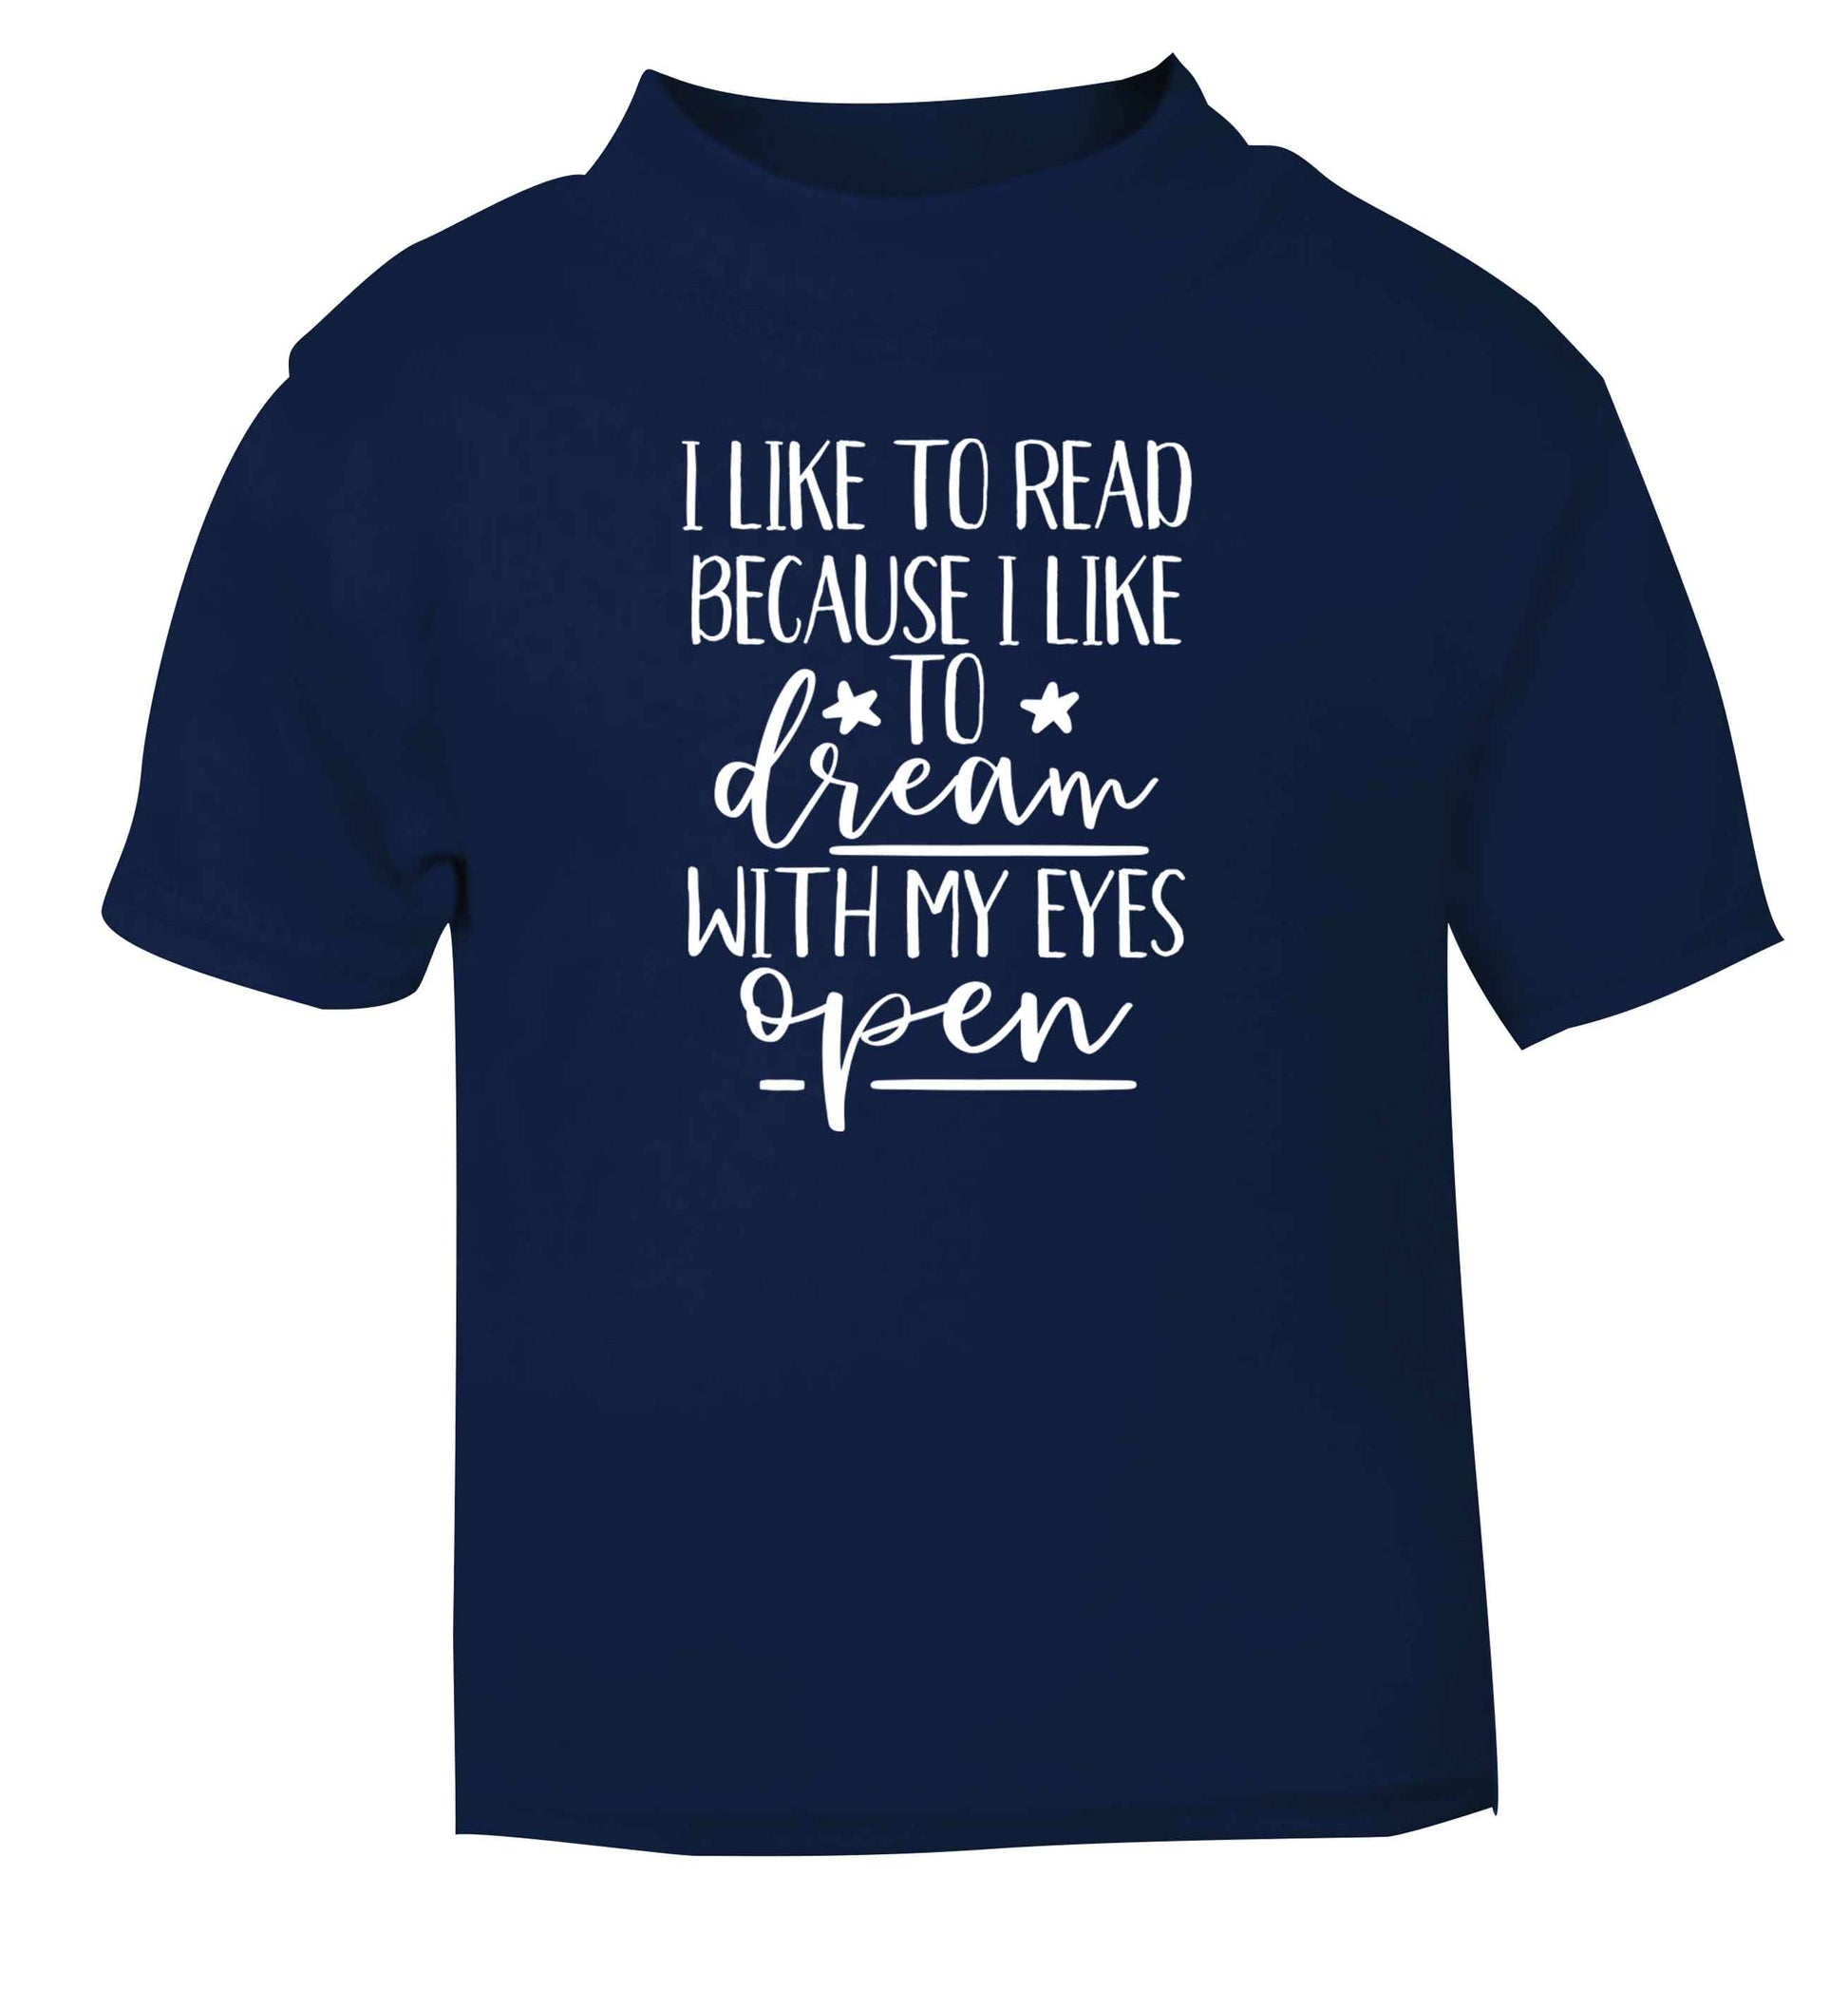 I like to read because I like to dream with my eyes open navy Baby Toddler Tshirt 2 Years